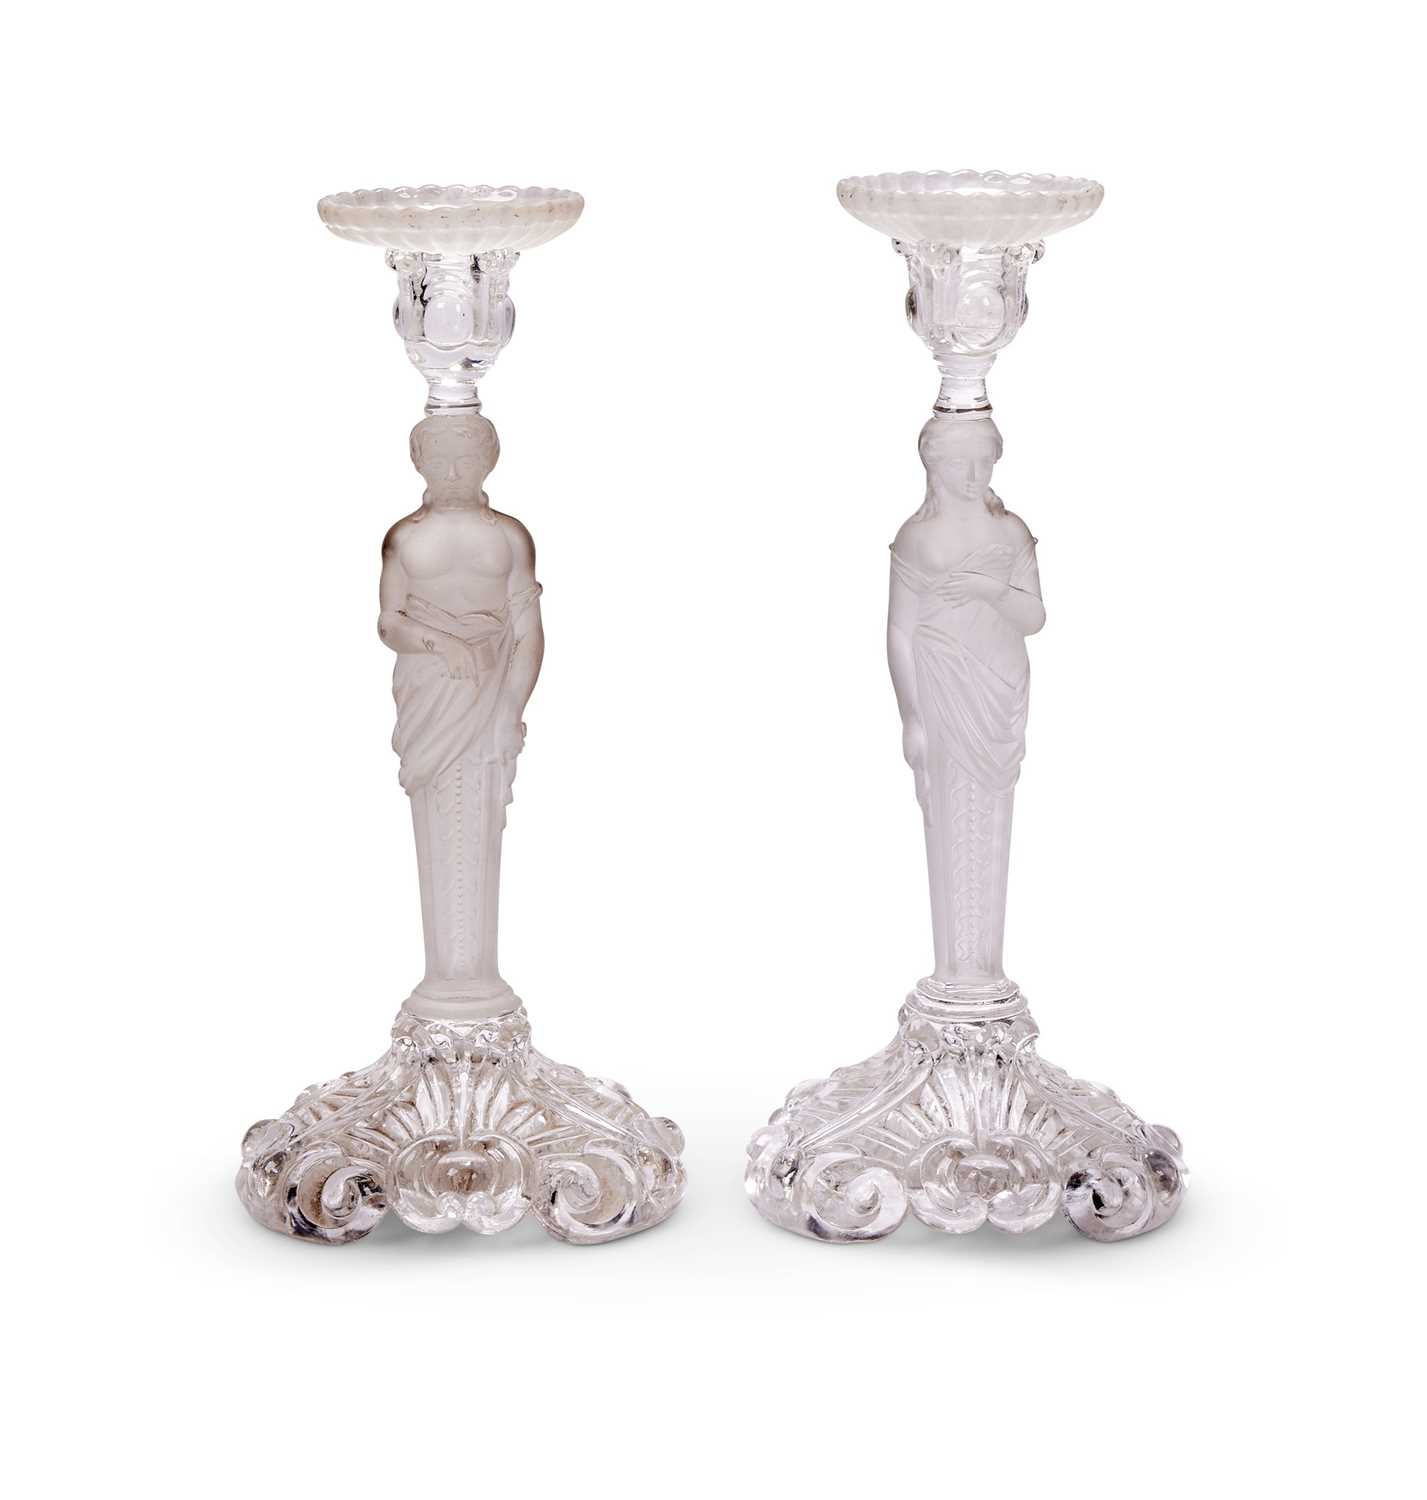 ATTRIBUTED TO BACCARAT: A PAIR OF EARLY 20TH CENTURY FROSTED GLASS FIGURAL CANDLESTICKS